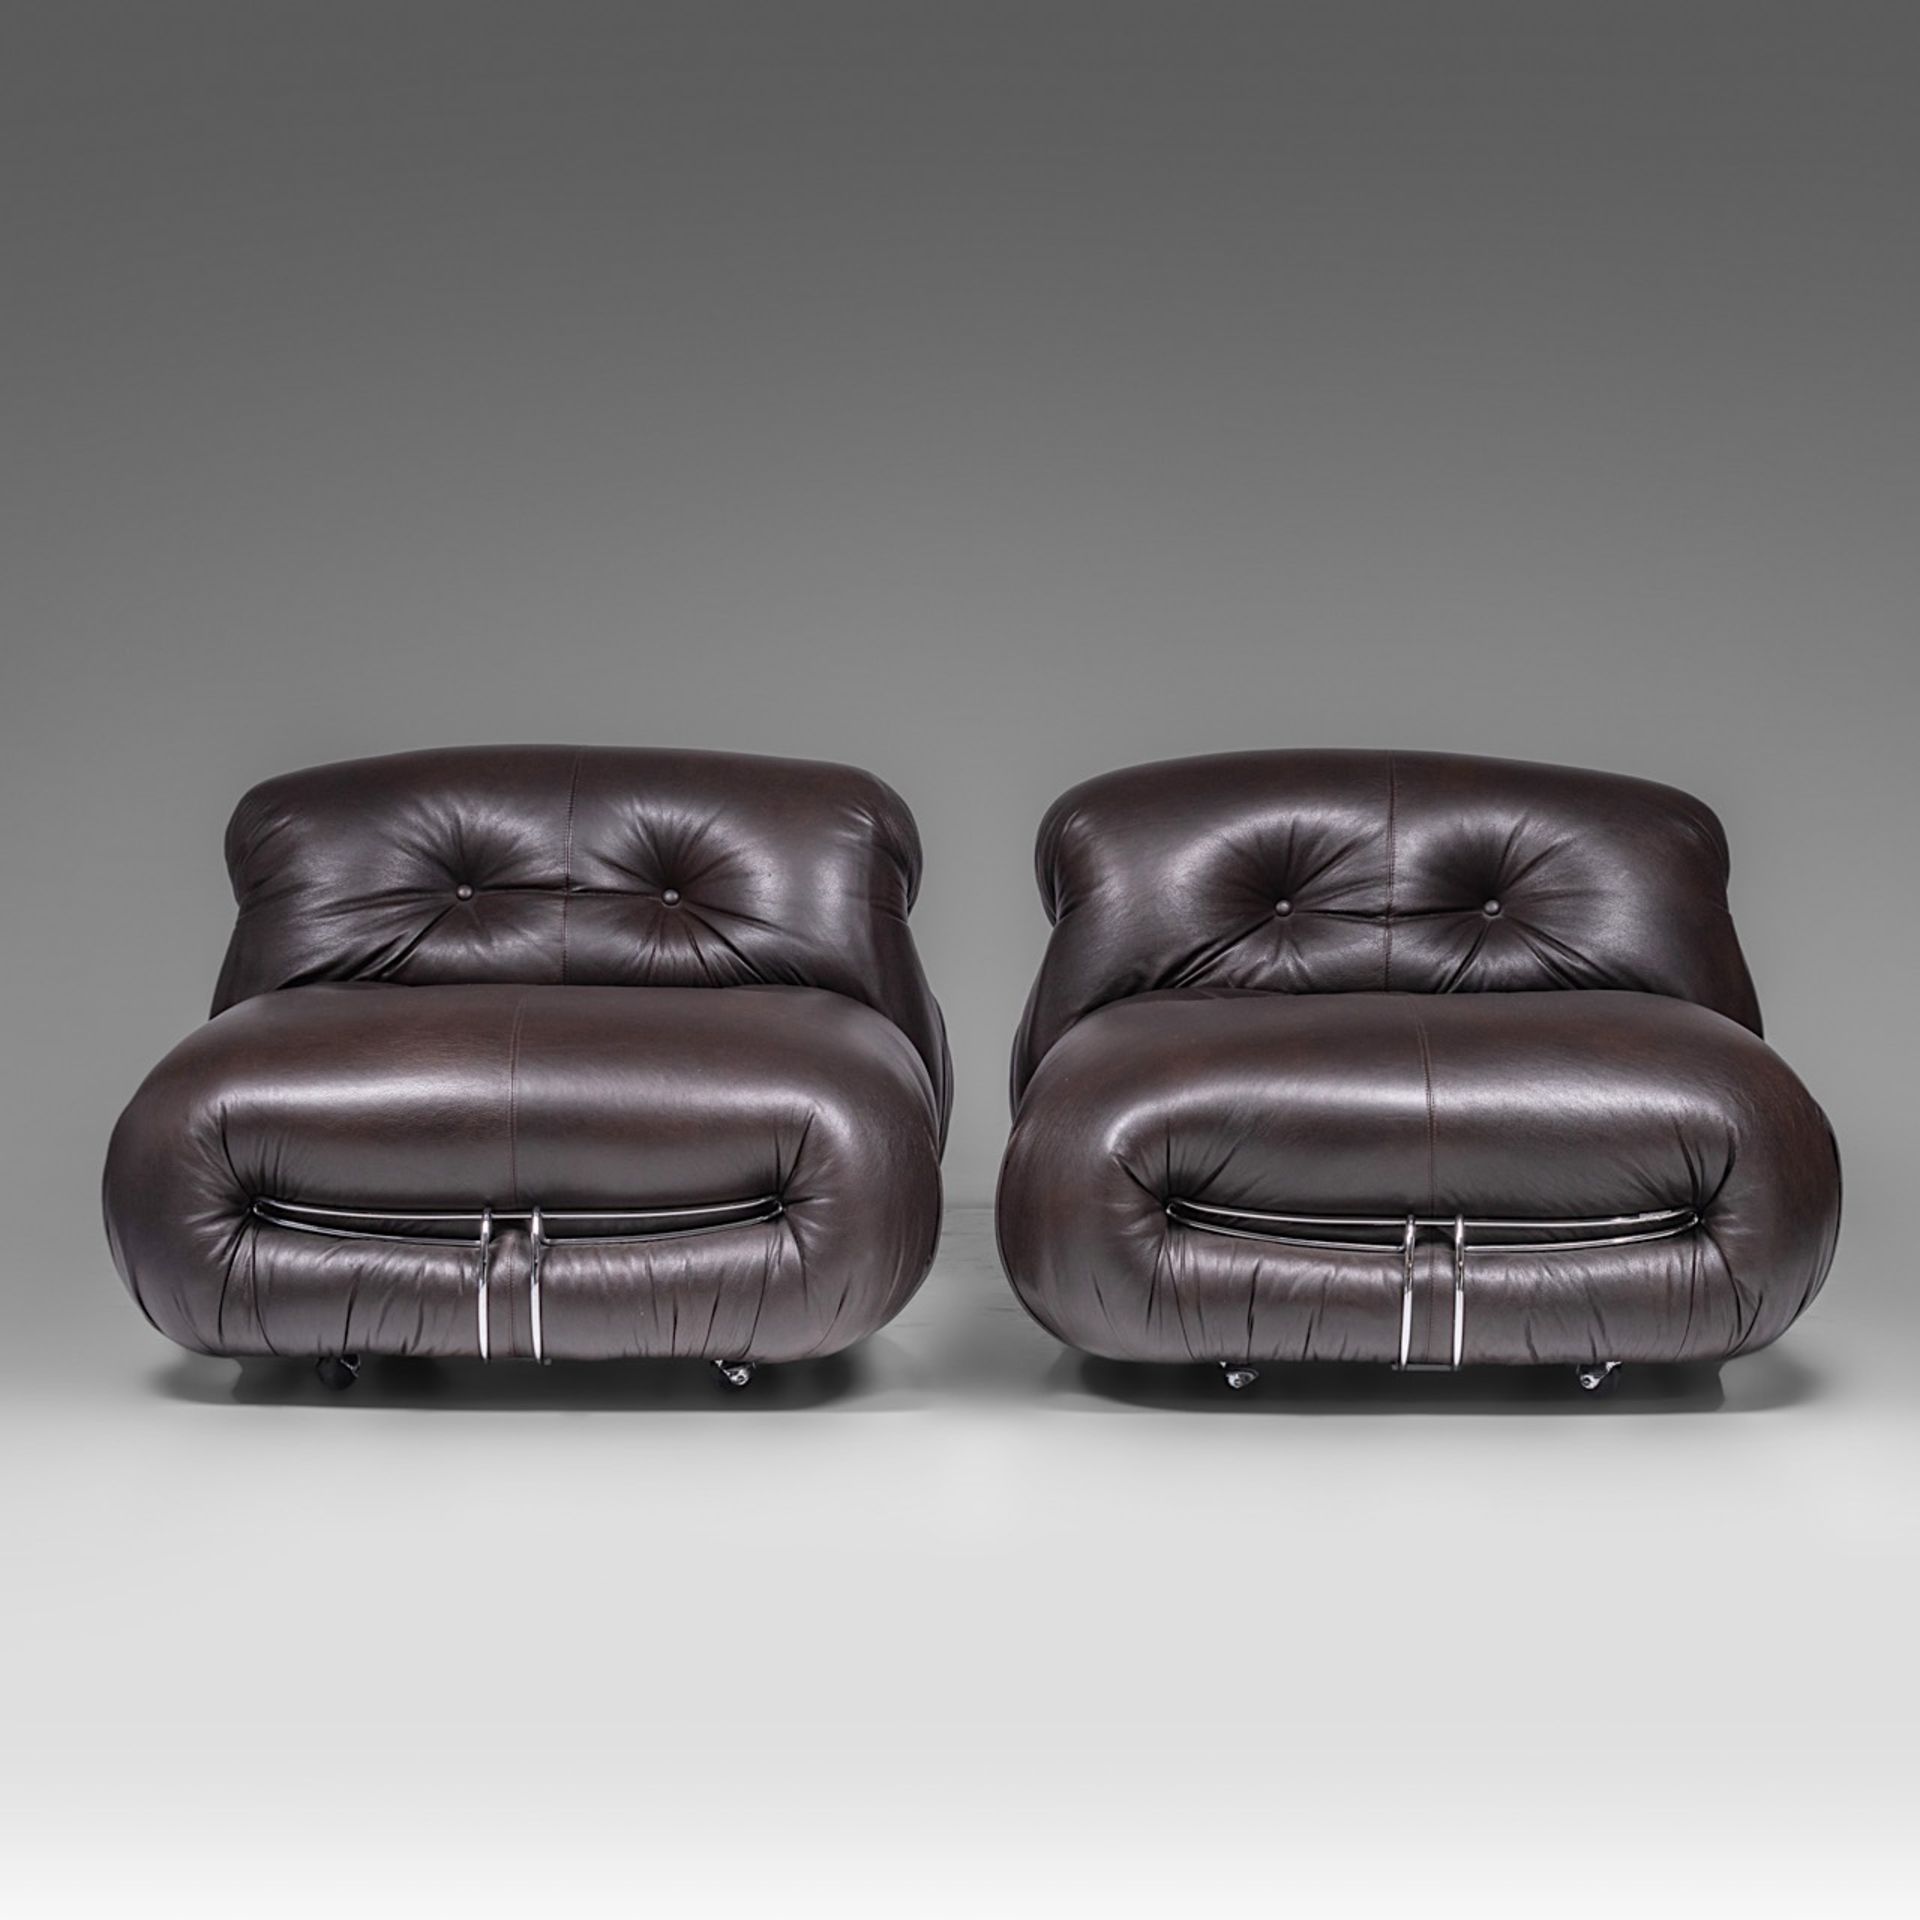 Two Soriana chaise-longues in brown leather and chrome by Afra & Tobia Scarpa for Cassina - Image 4 of 8